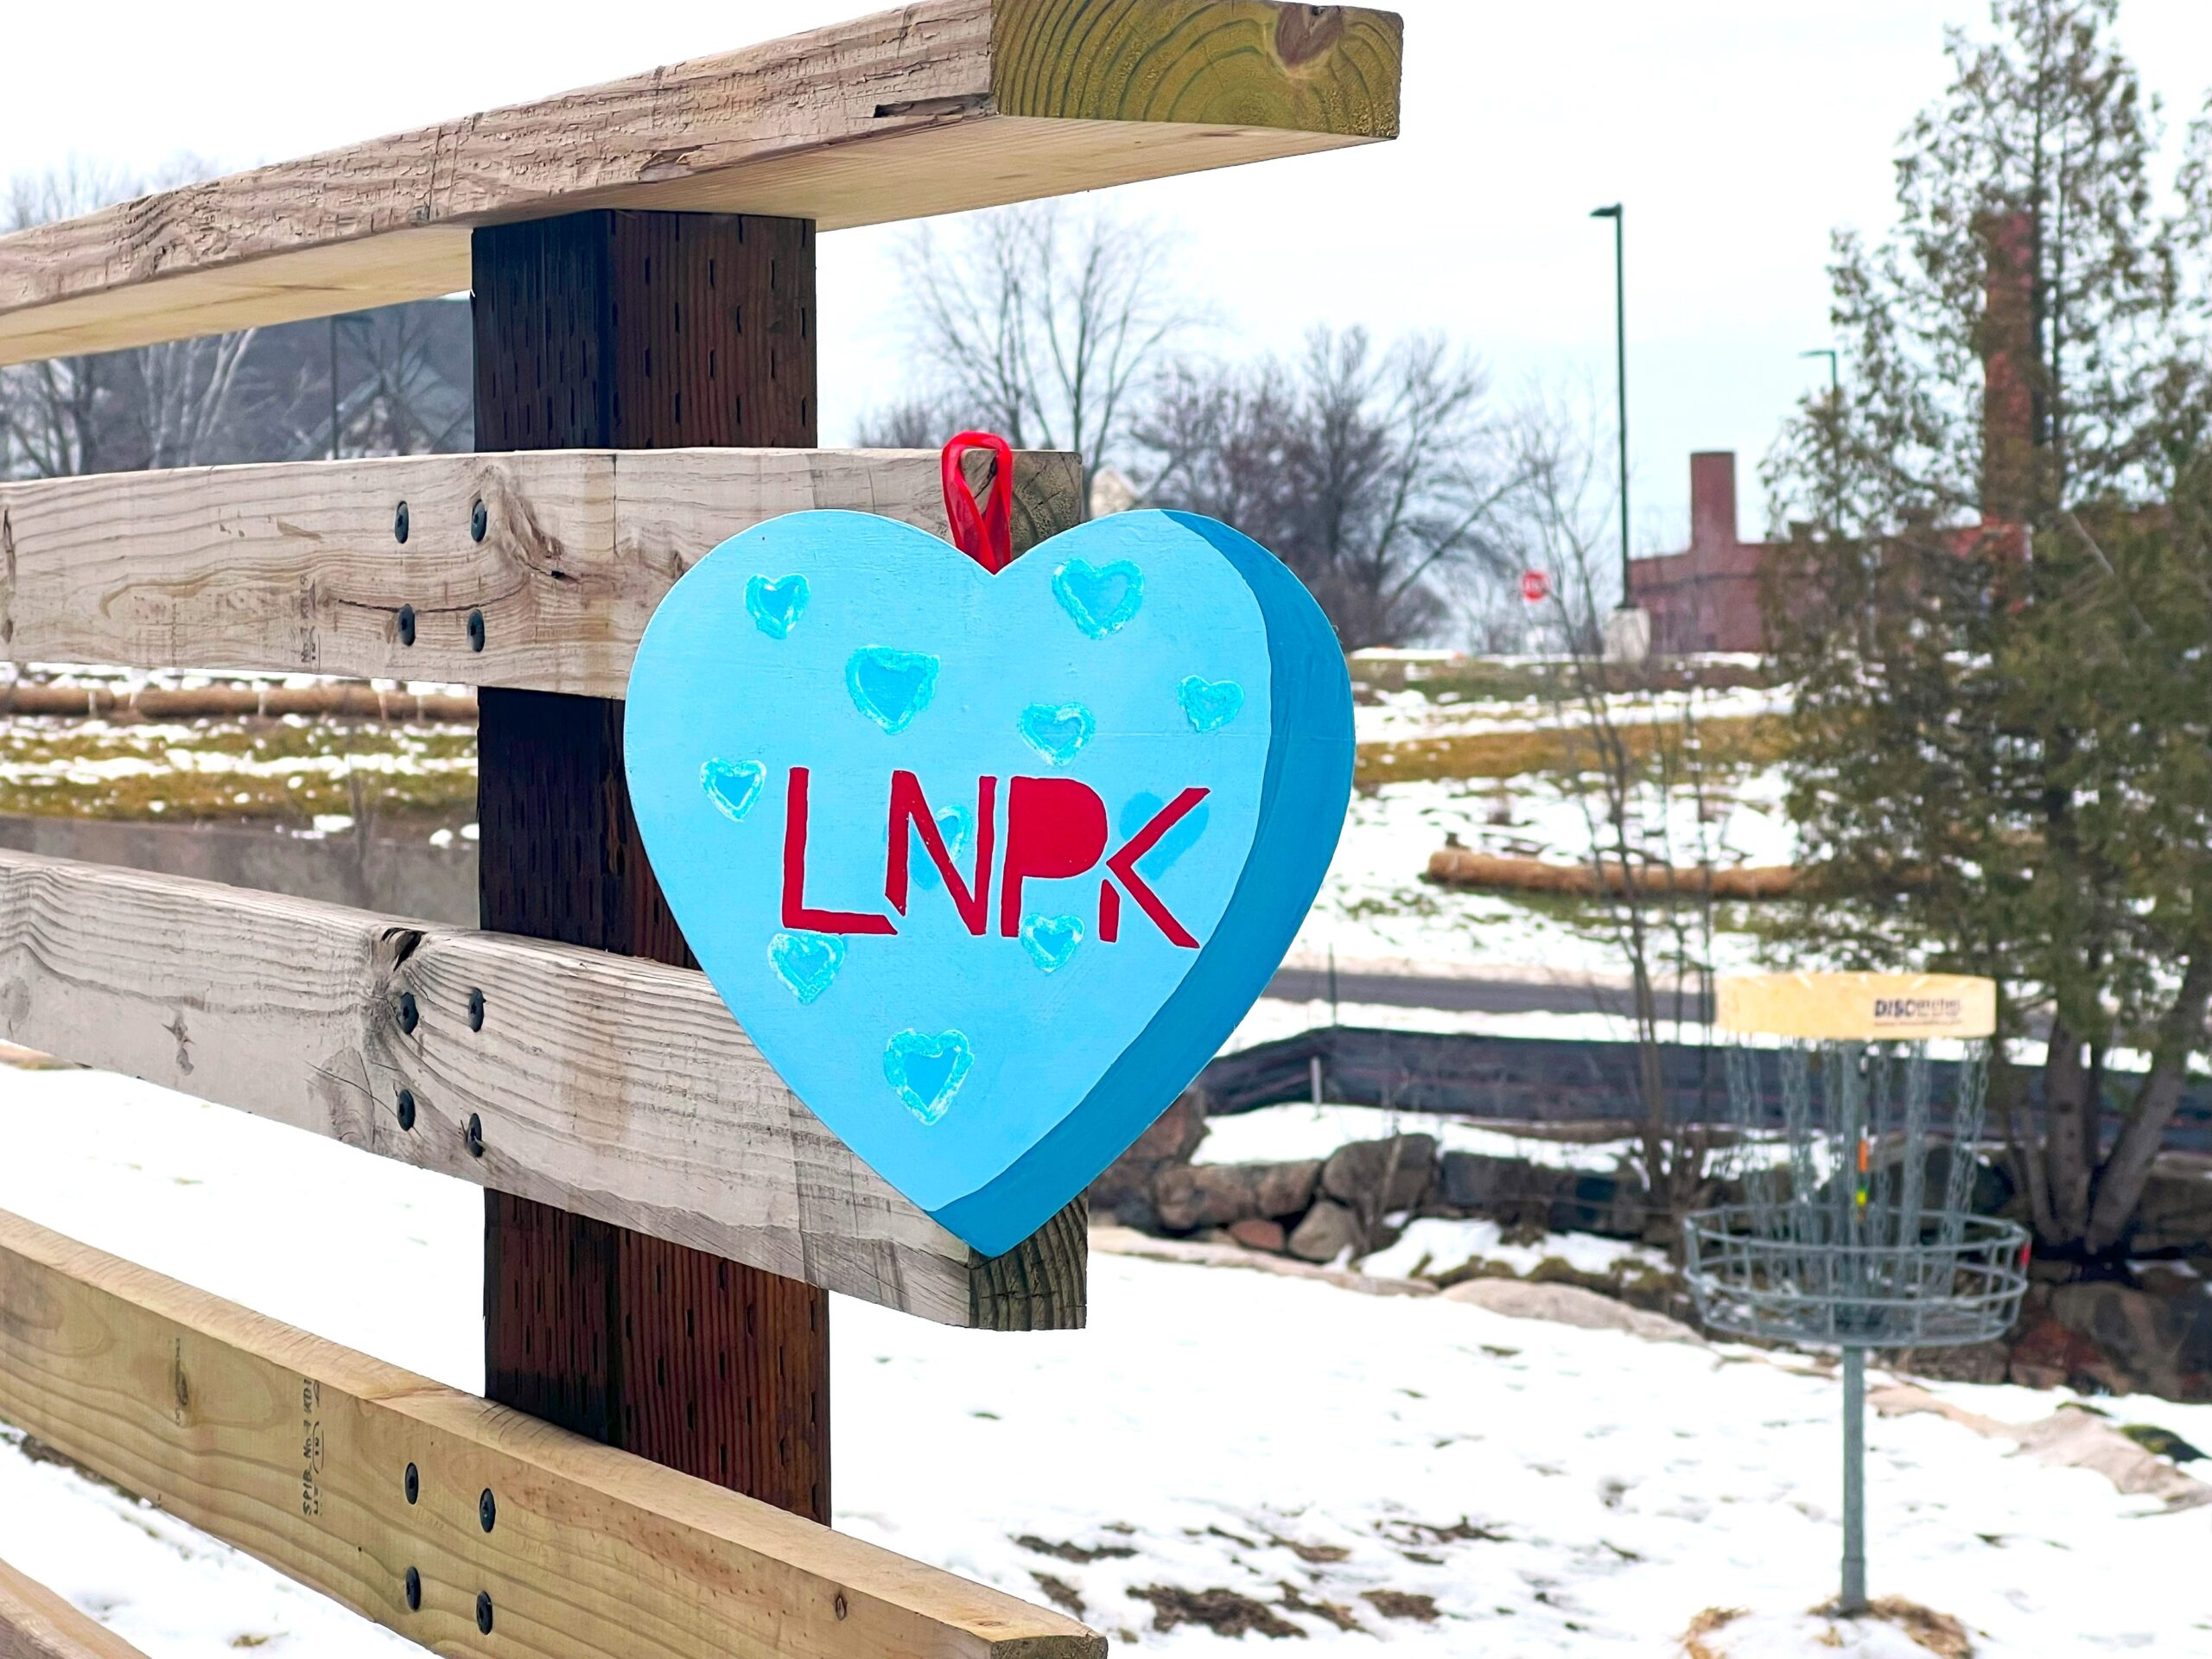 Blue heart with sparkly dots and "LNPK" in red hangs on a wooden bridge.